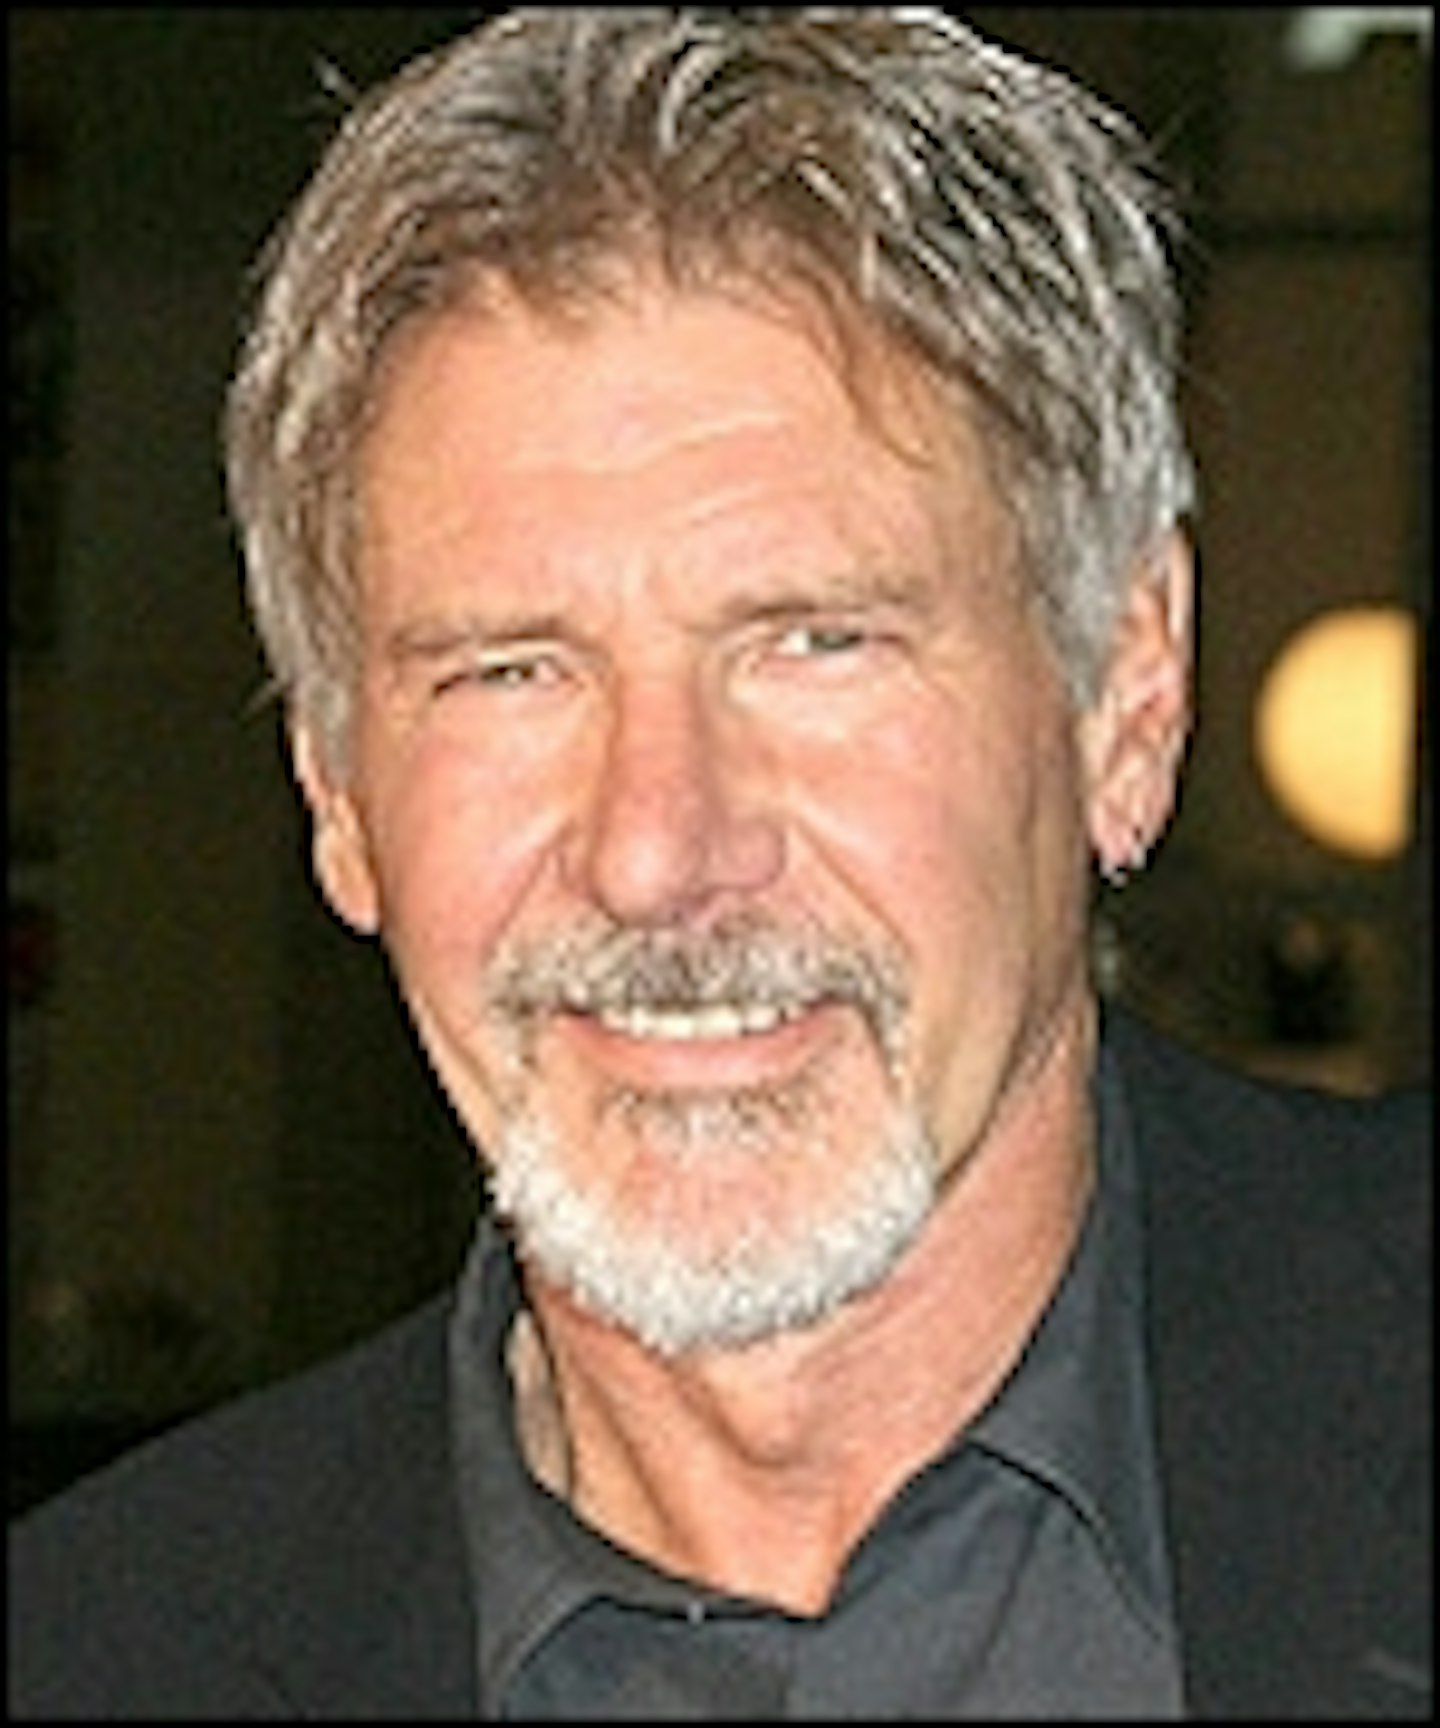 Harrison Ford Has A Morning Glory